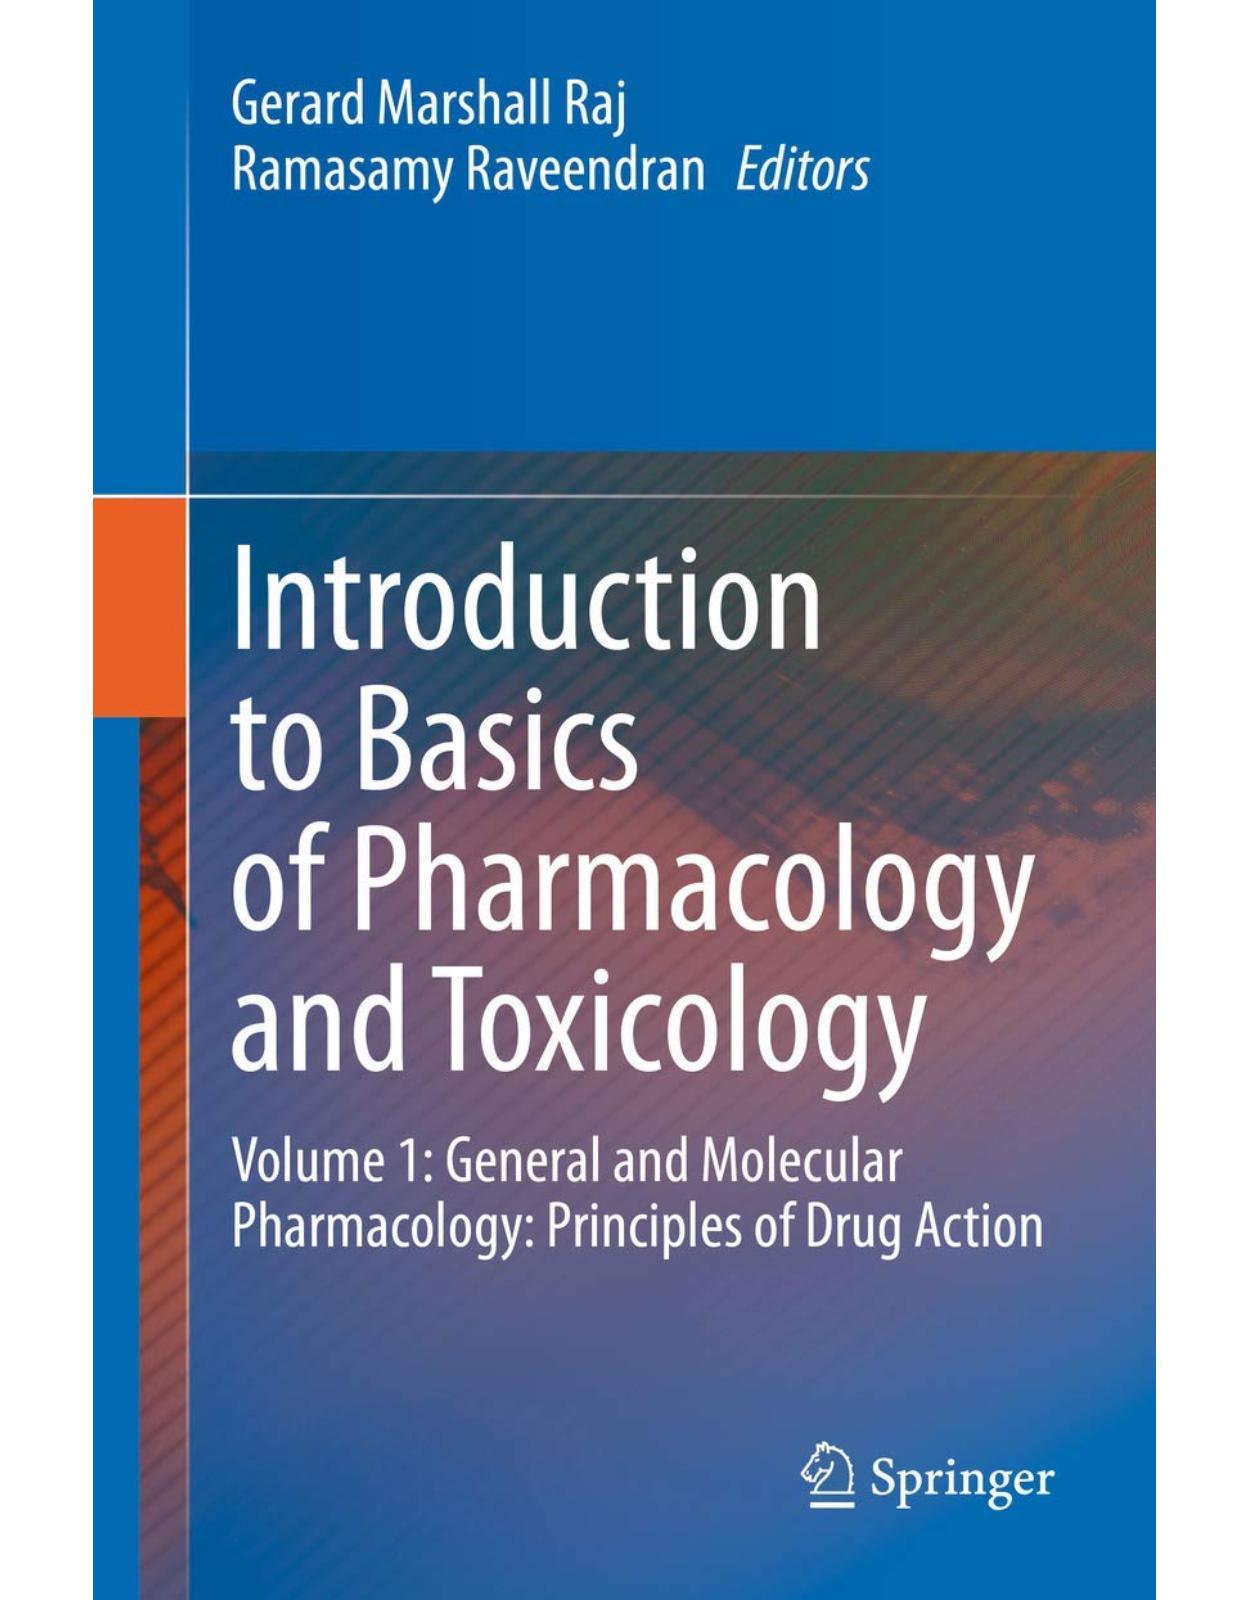 Introduction to Basics of Pharmacology and Toxicology: Volume 1: General and Molecular Pharmacology: Principles of Drug Action